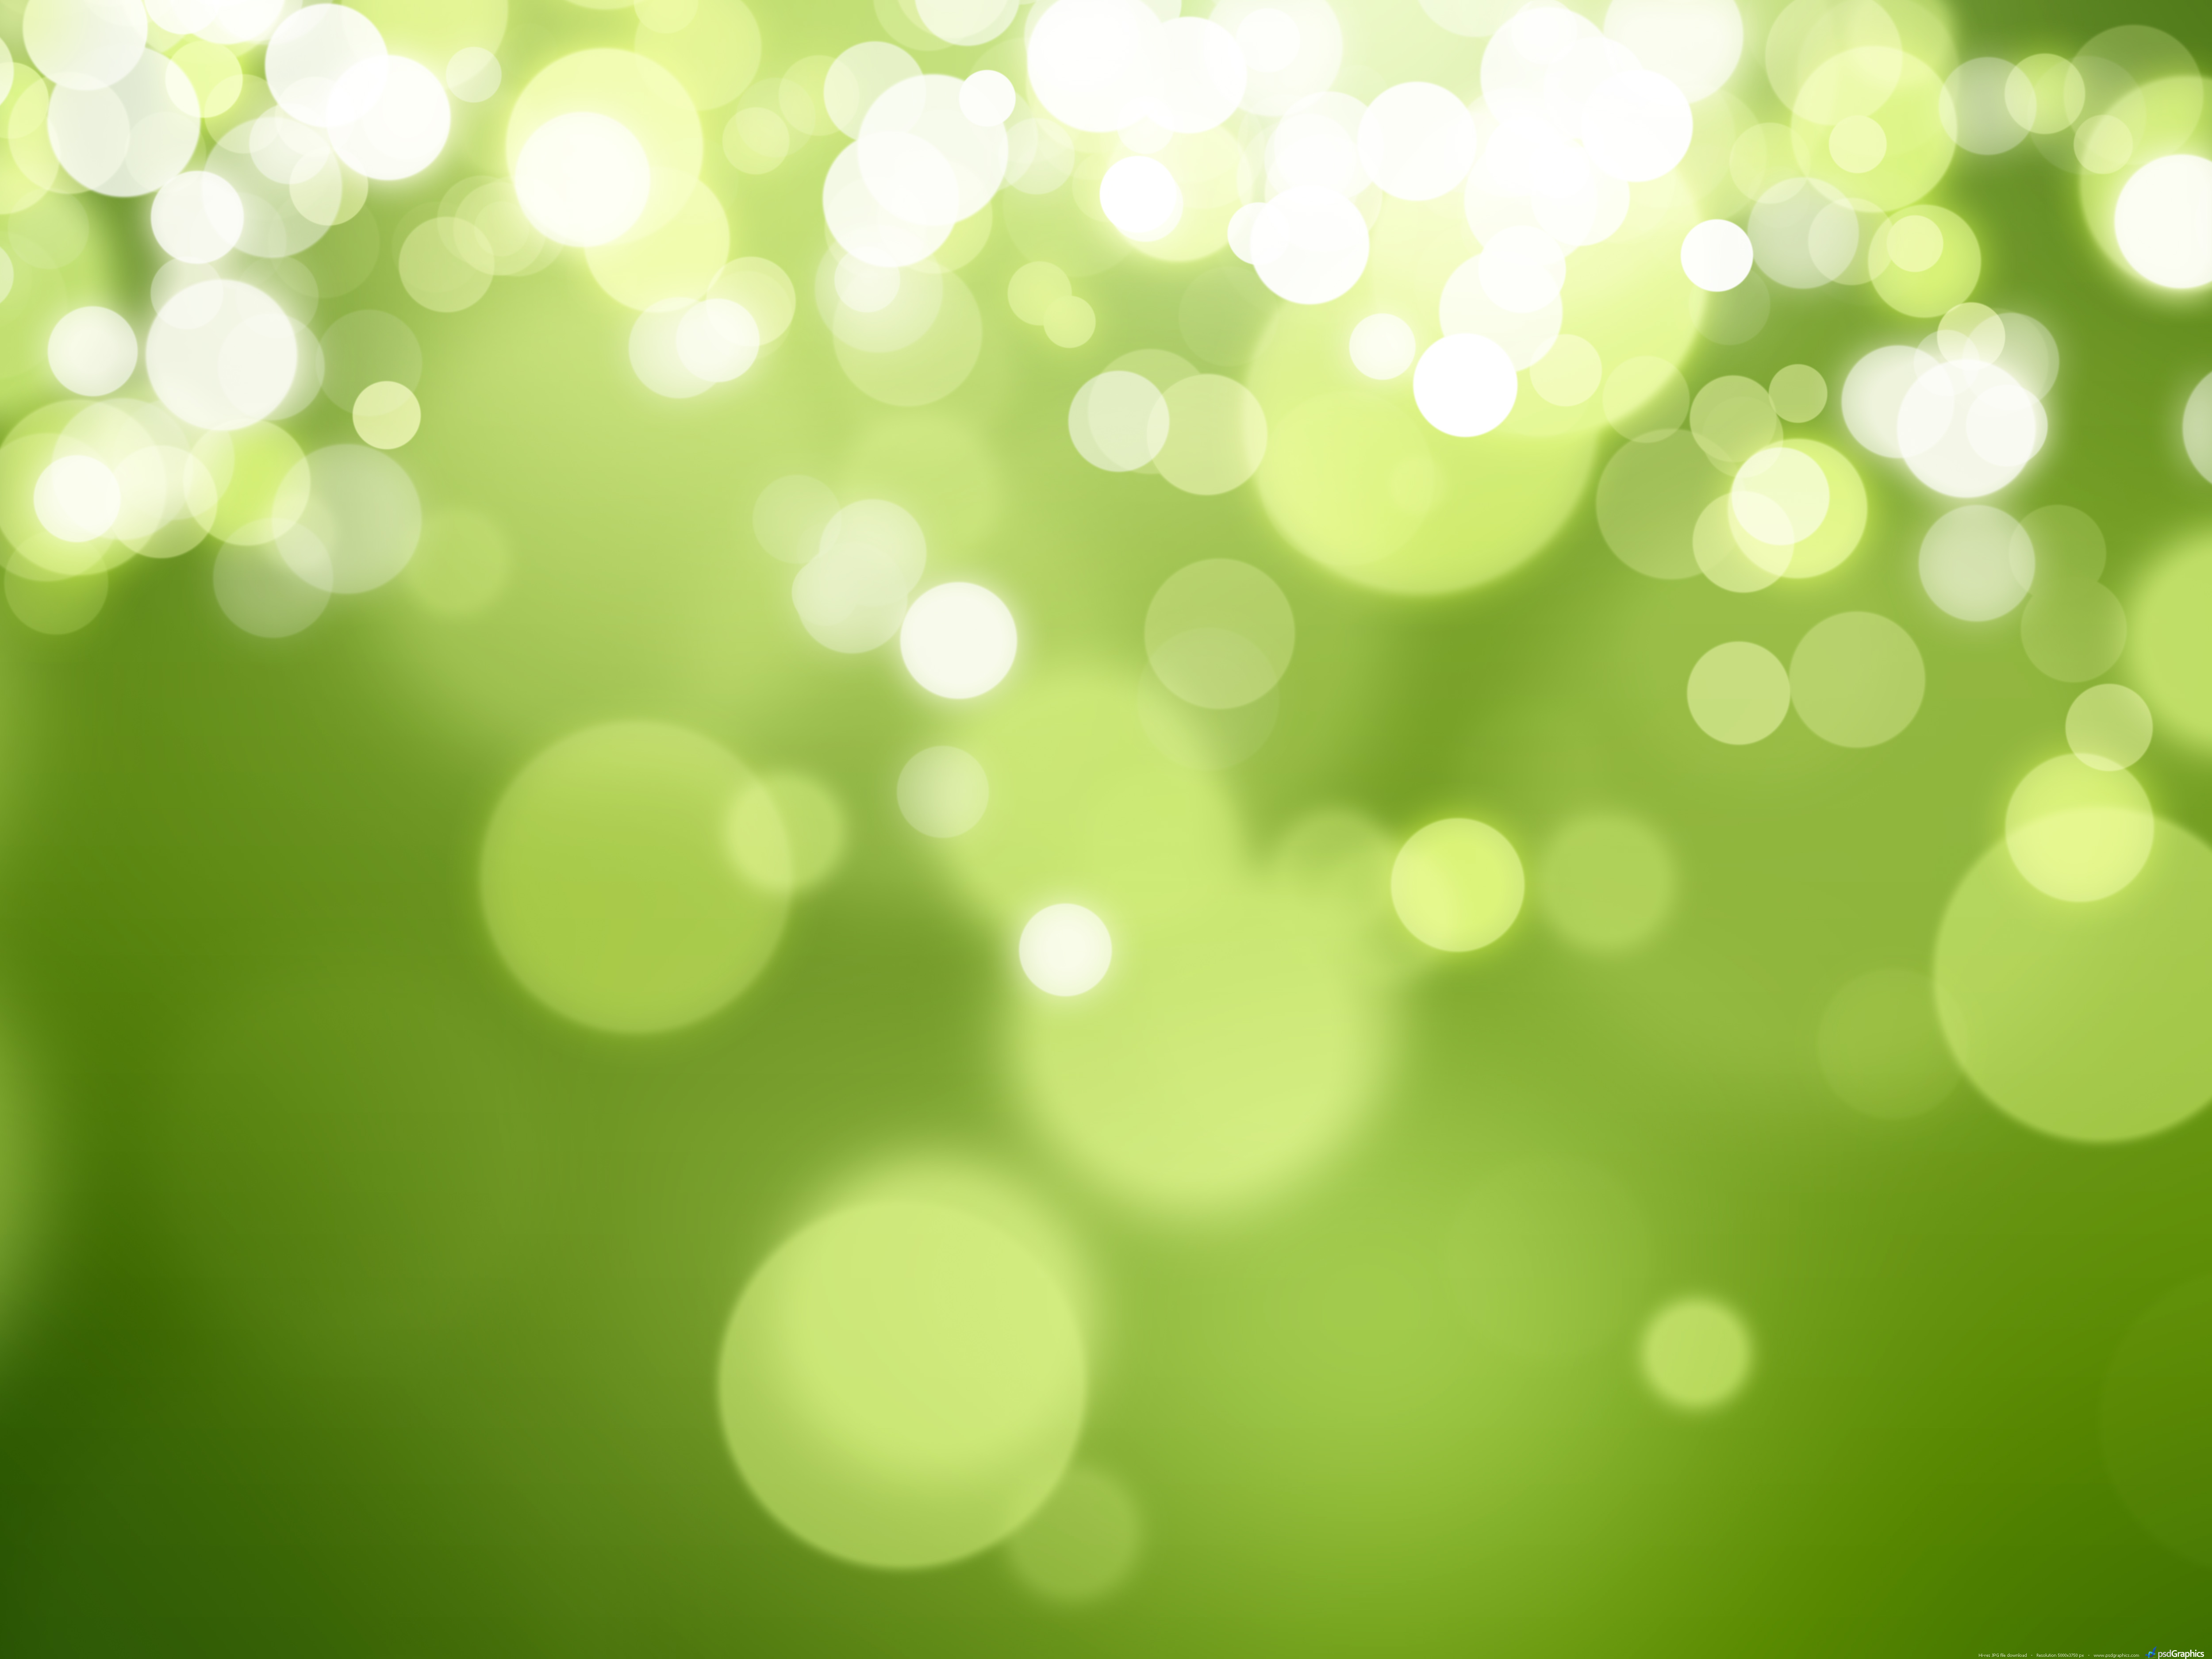 Eco friendly green background | PSDGraphics